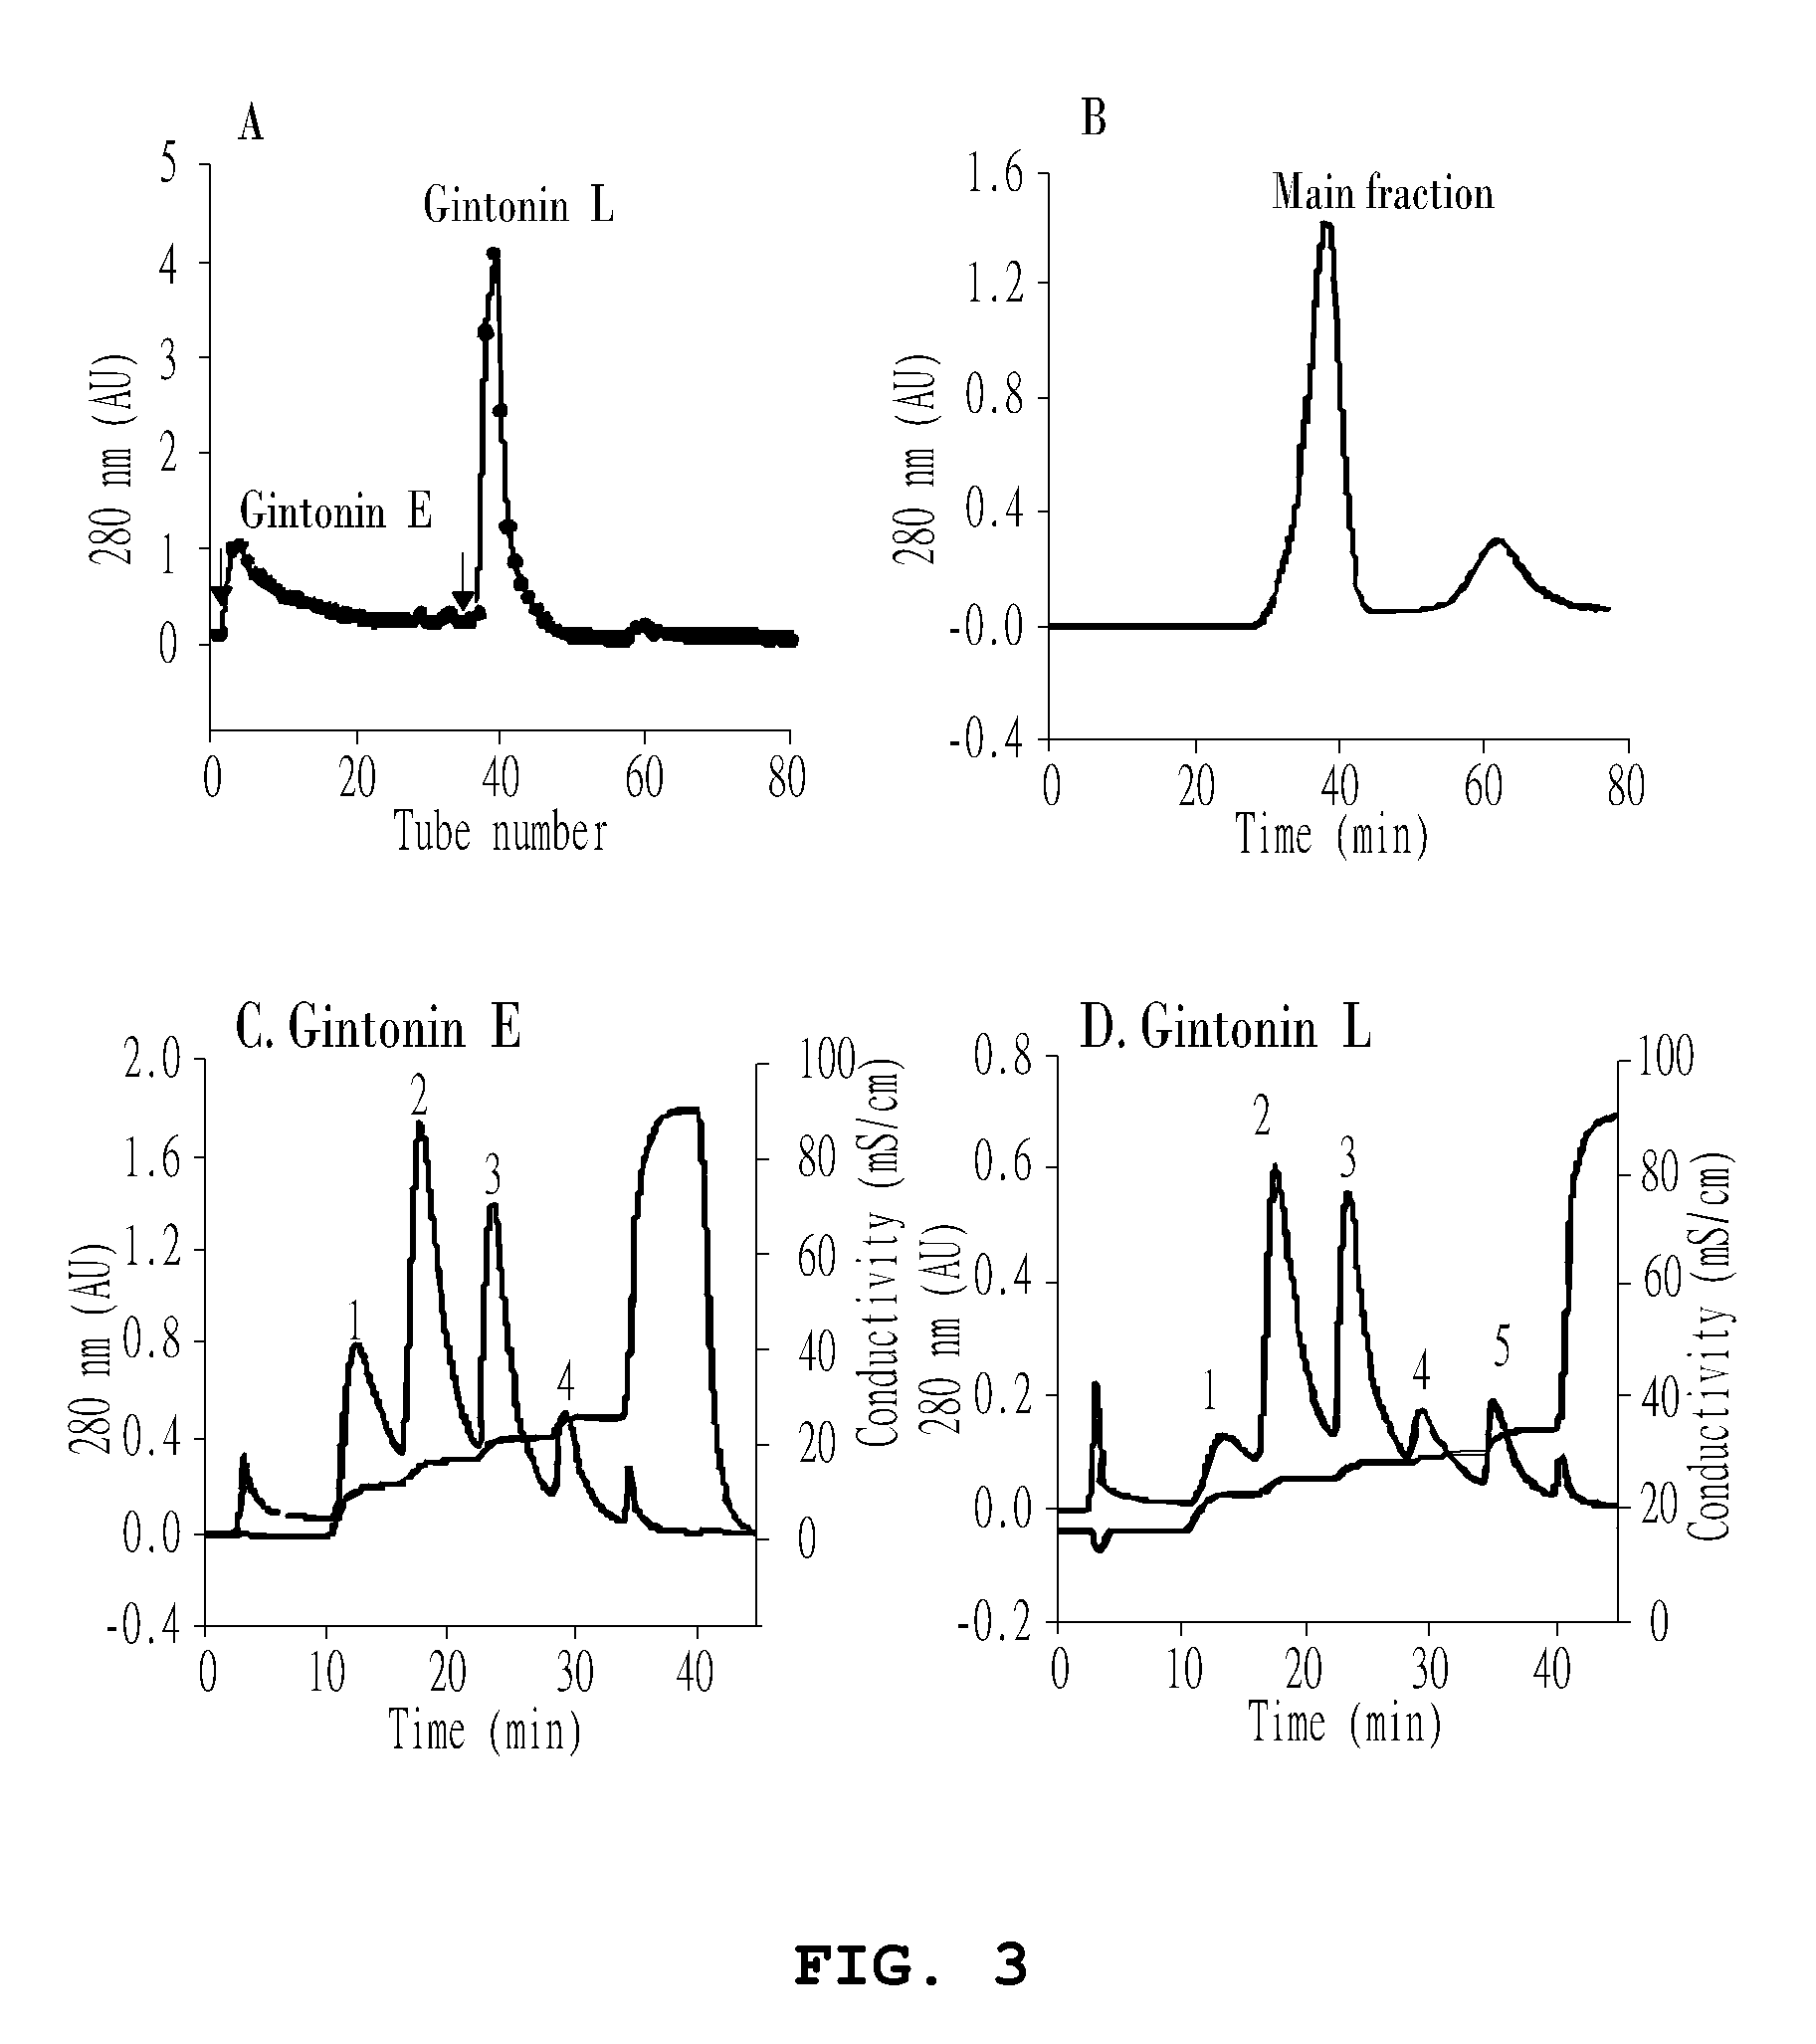 Method for preparing gintonin, which is a novel glycolipoproetin from panax ginseng, and gintonin, which is a novel glycolipoprotein, prepared by the method